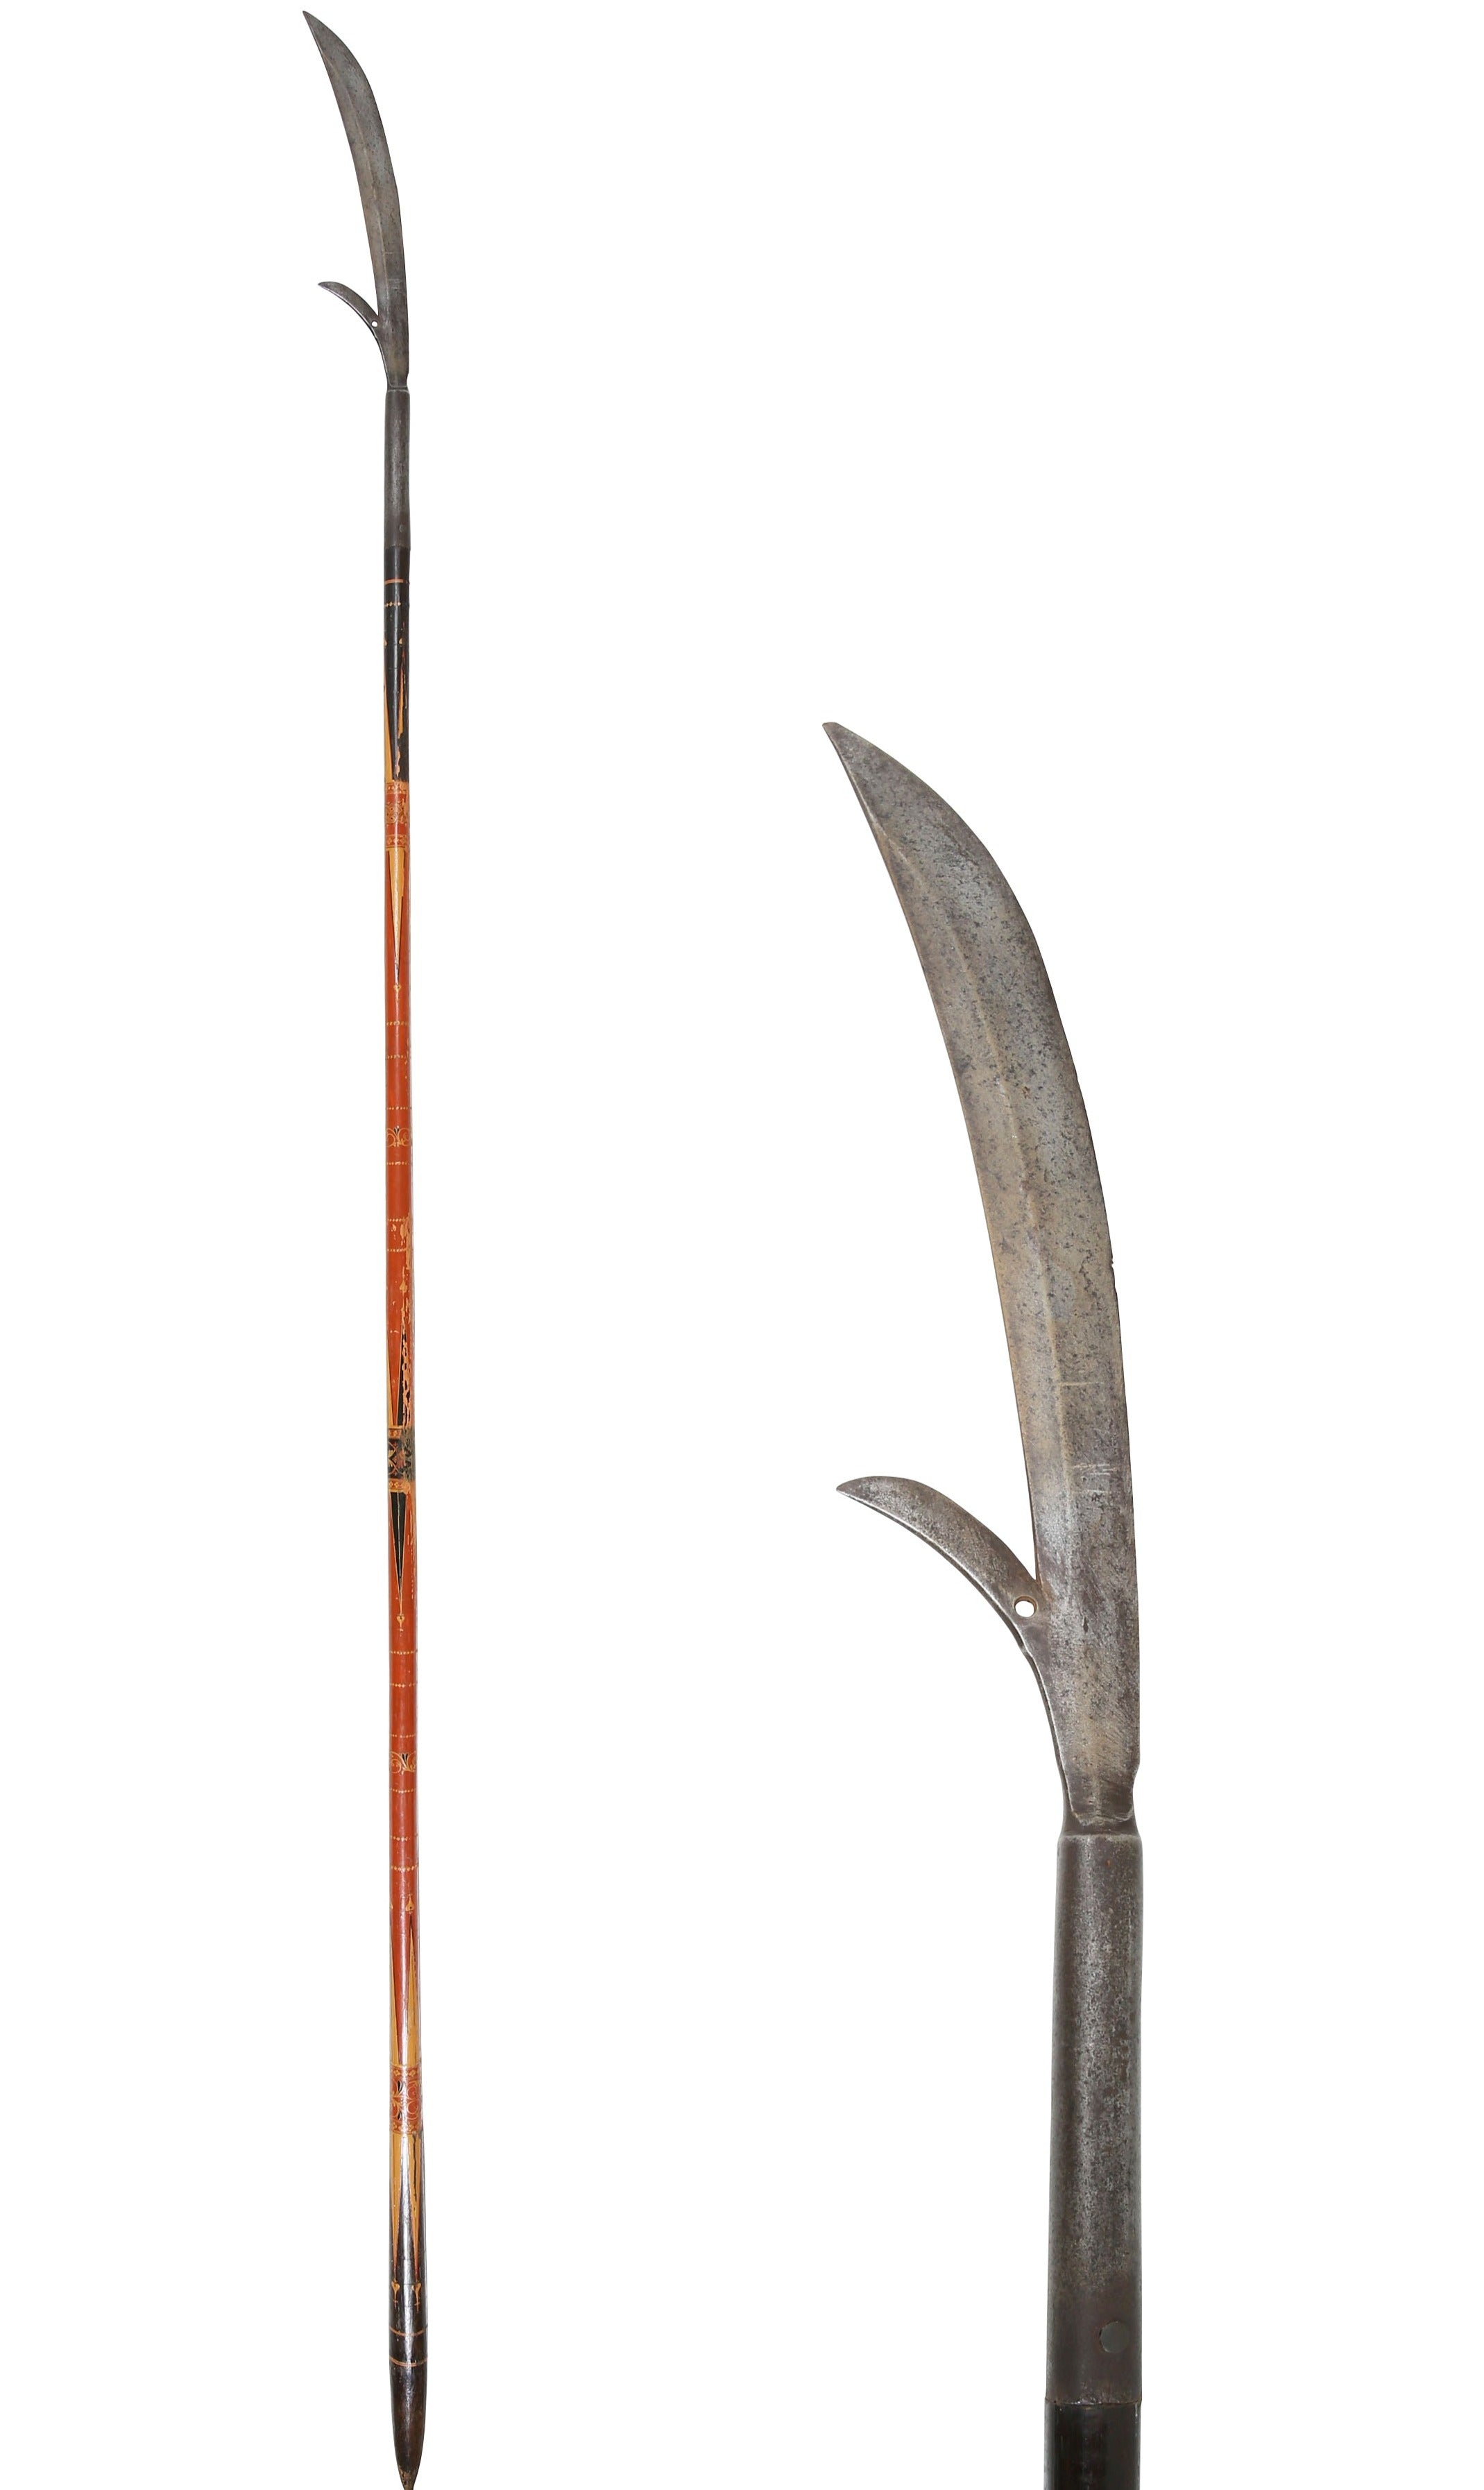 RARE SOUTH INDIAN GLAIVE, 18TH-EARLY 19TH CENTURY - Fagan Arms